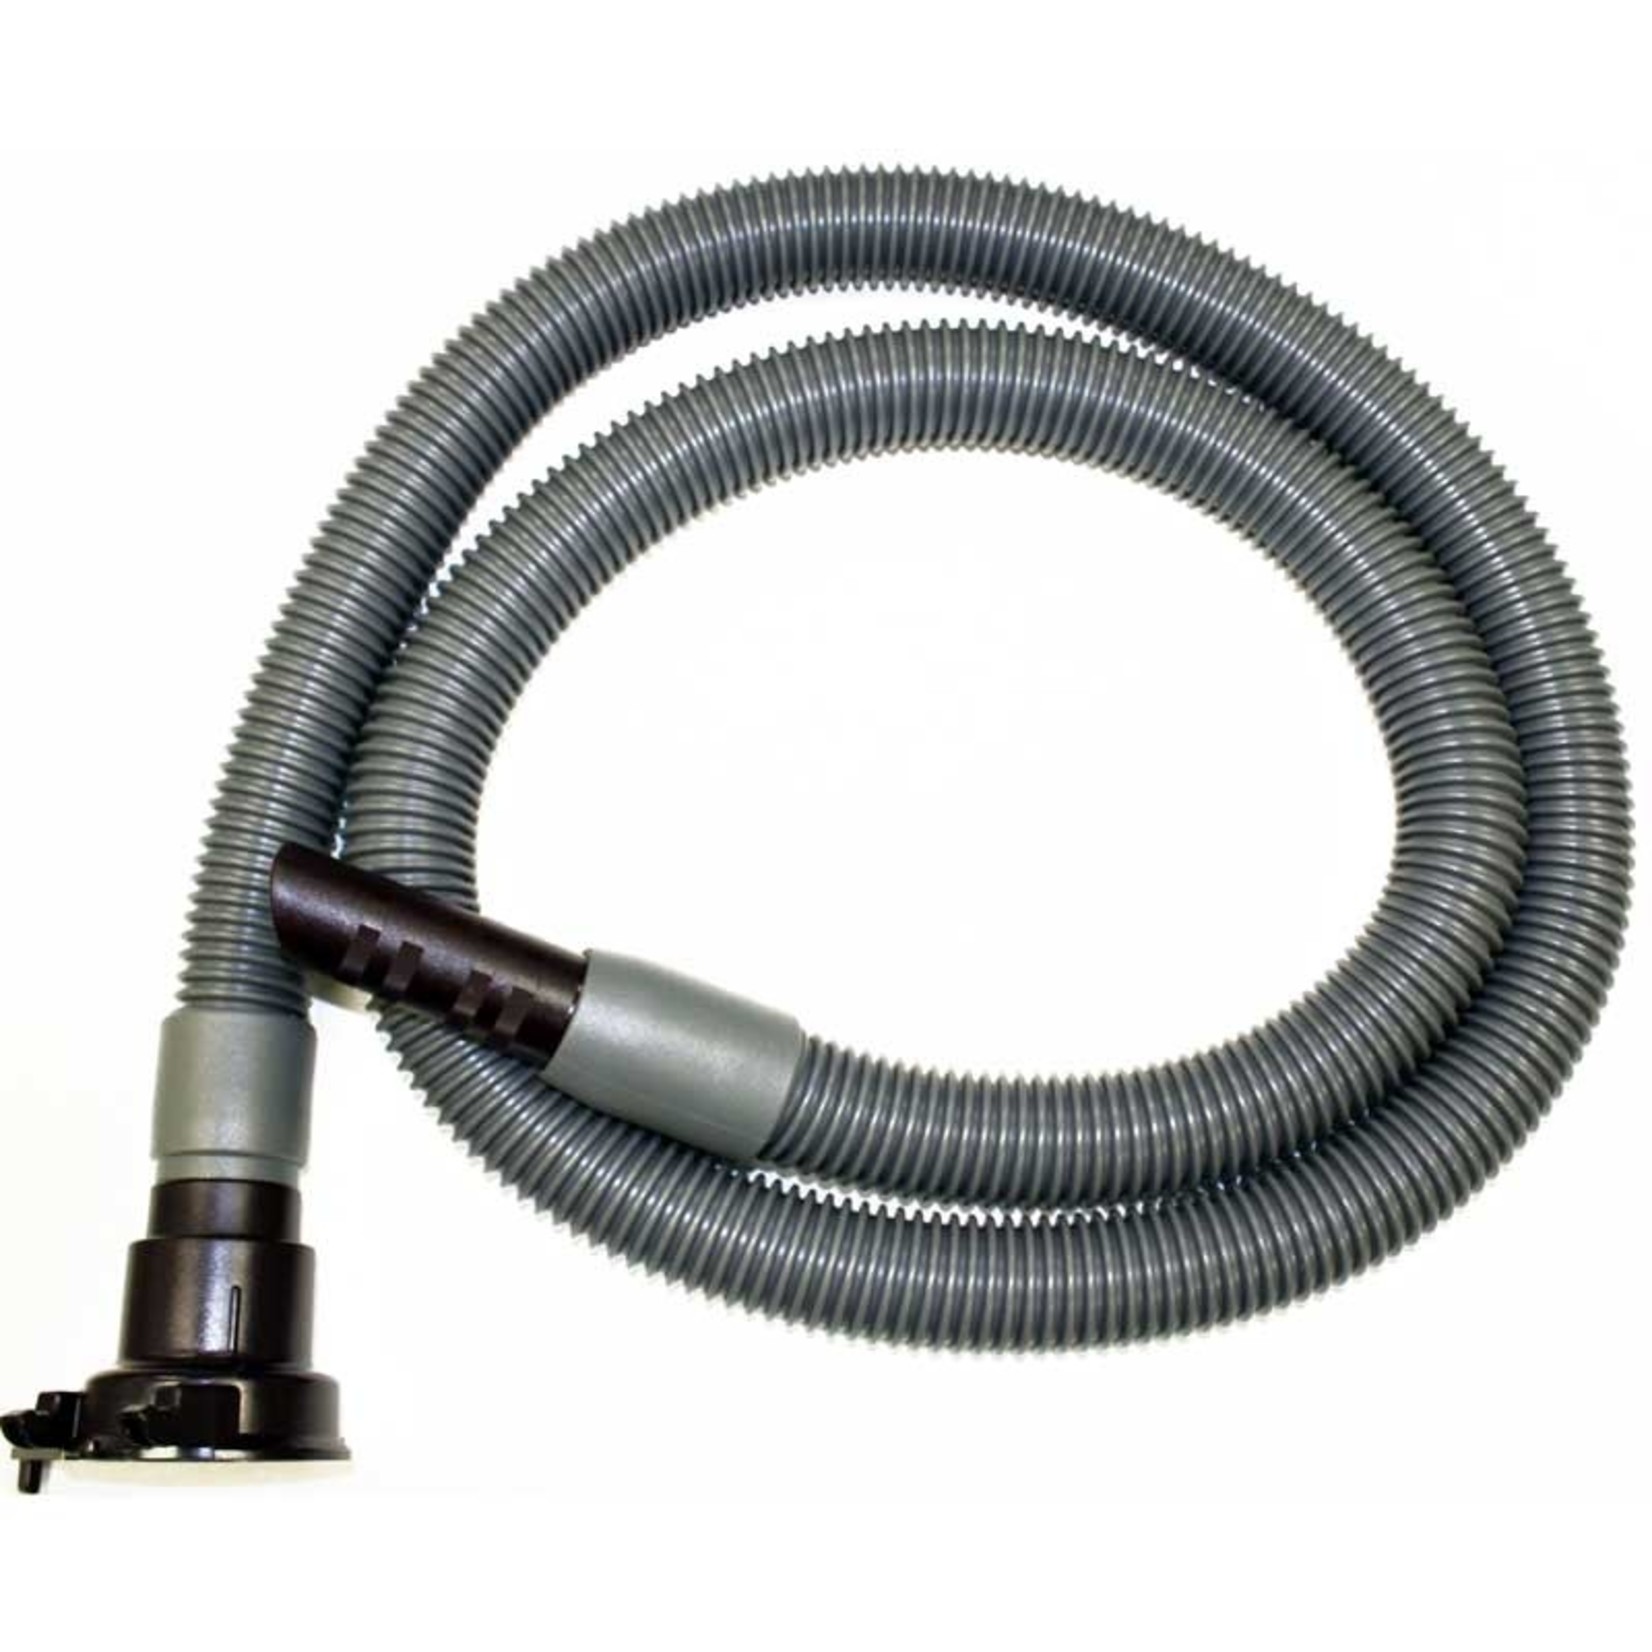 Kirby Kirby G5 Hose, Gray Attachment With Avalir Ends